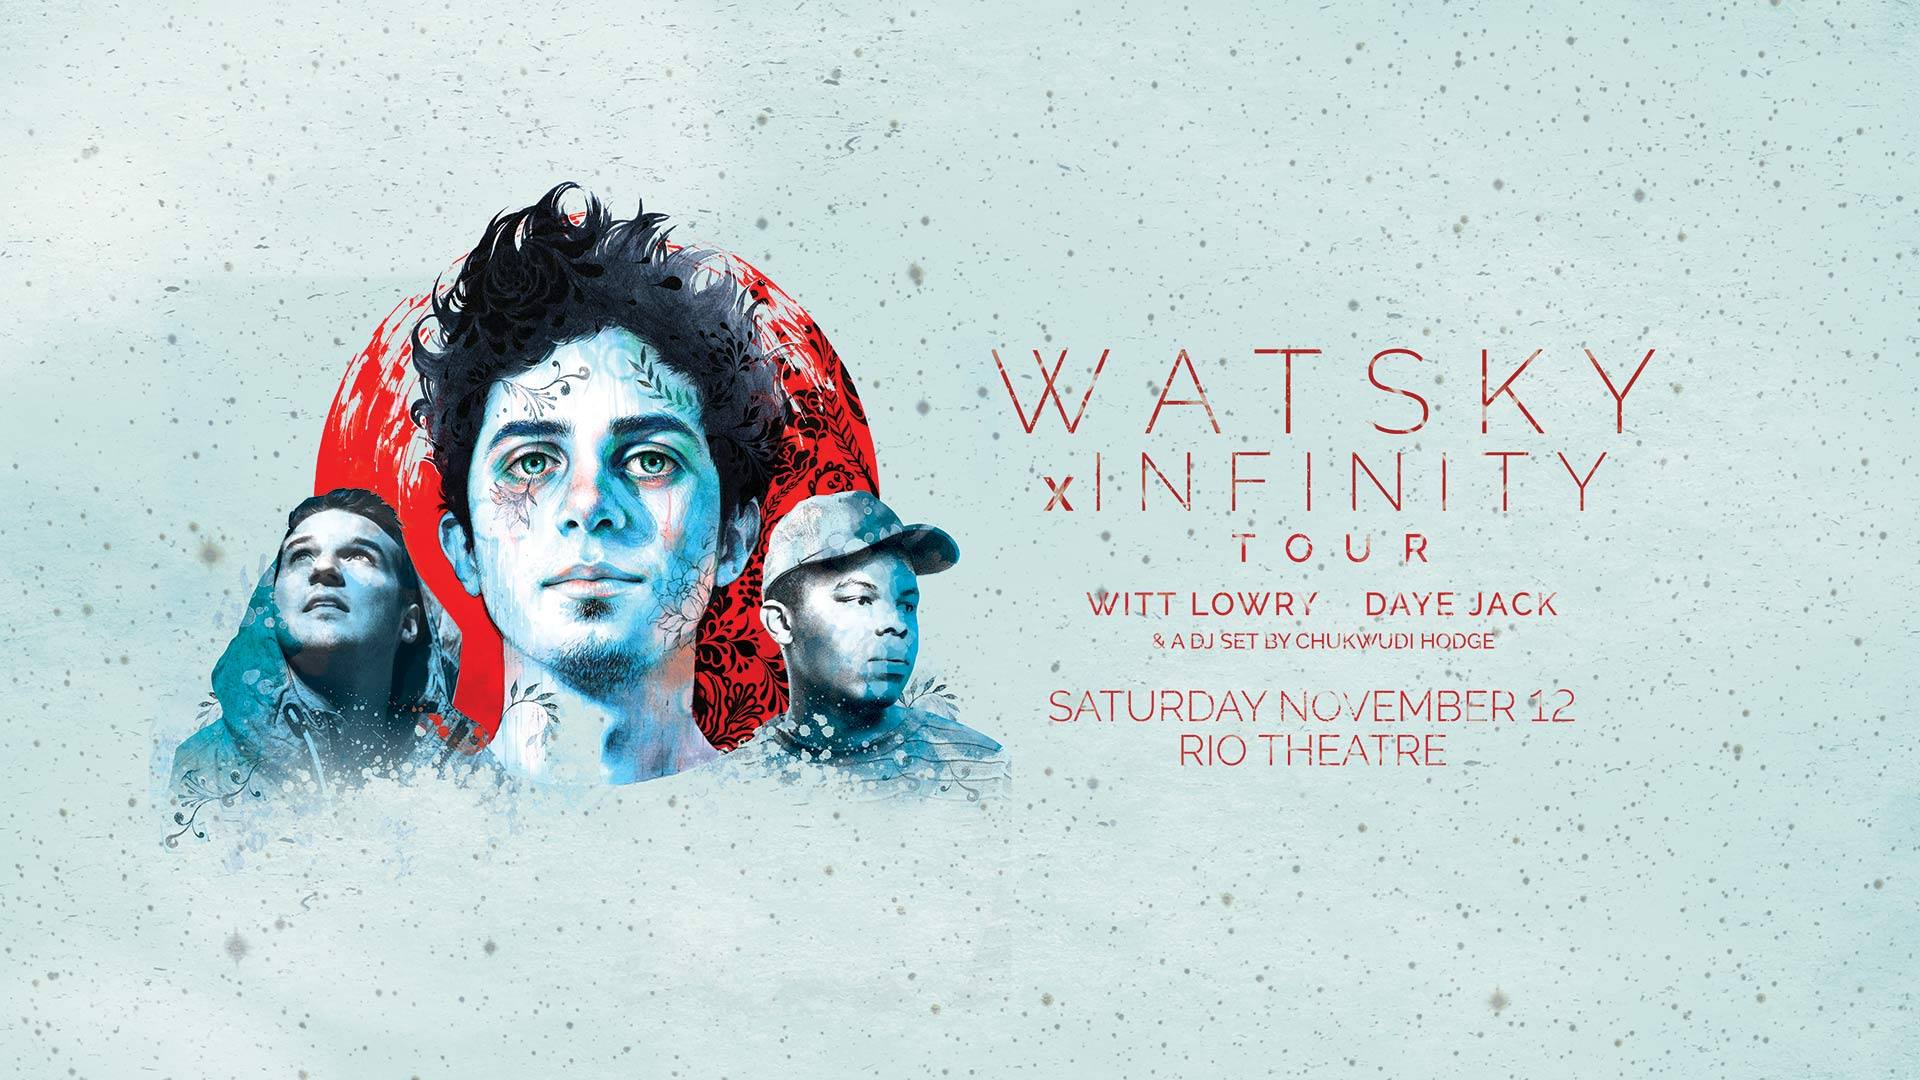 Watsky with Special Guests Witt Lowry, Daye Jack and Chukwudi Hodge